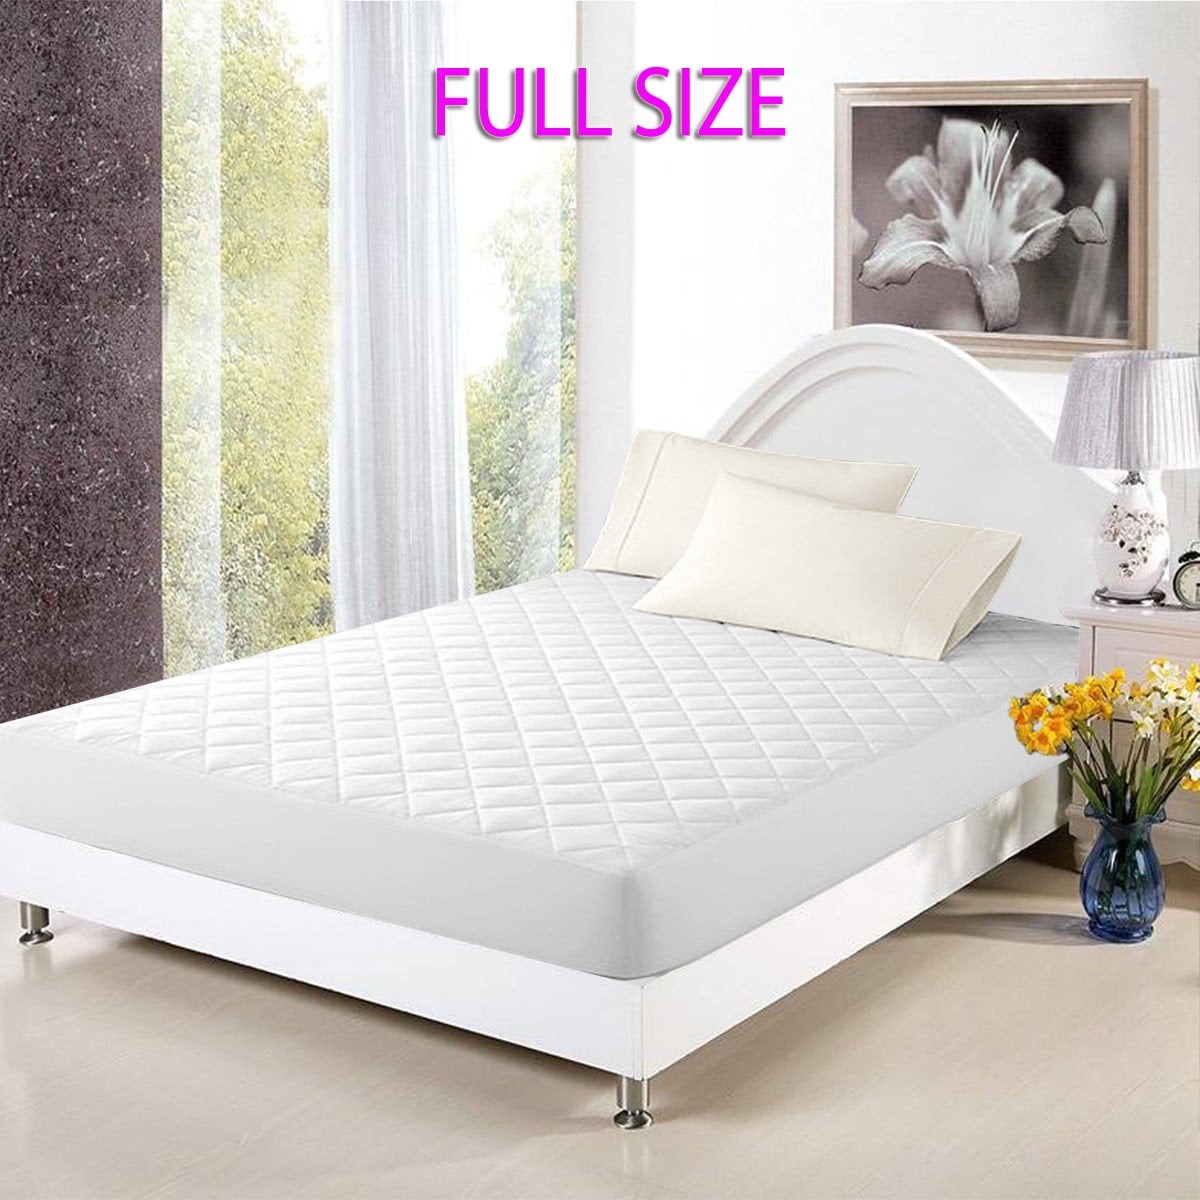 Mattress Protector Waterproof Hypoallergenic Pad Bed Bug Cover Topper Full Size 